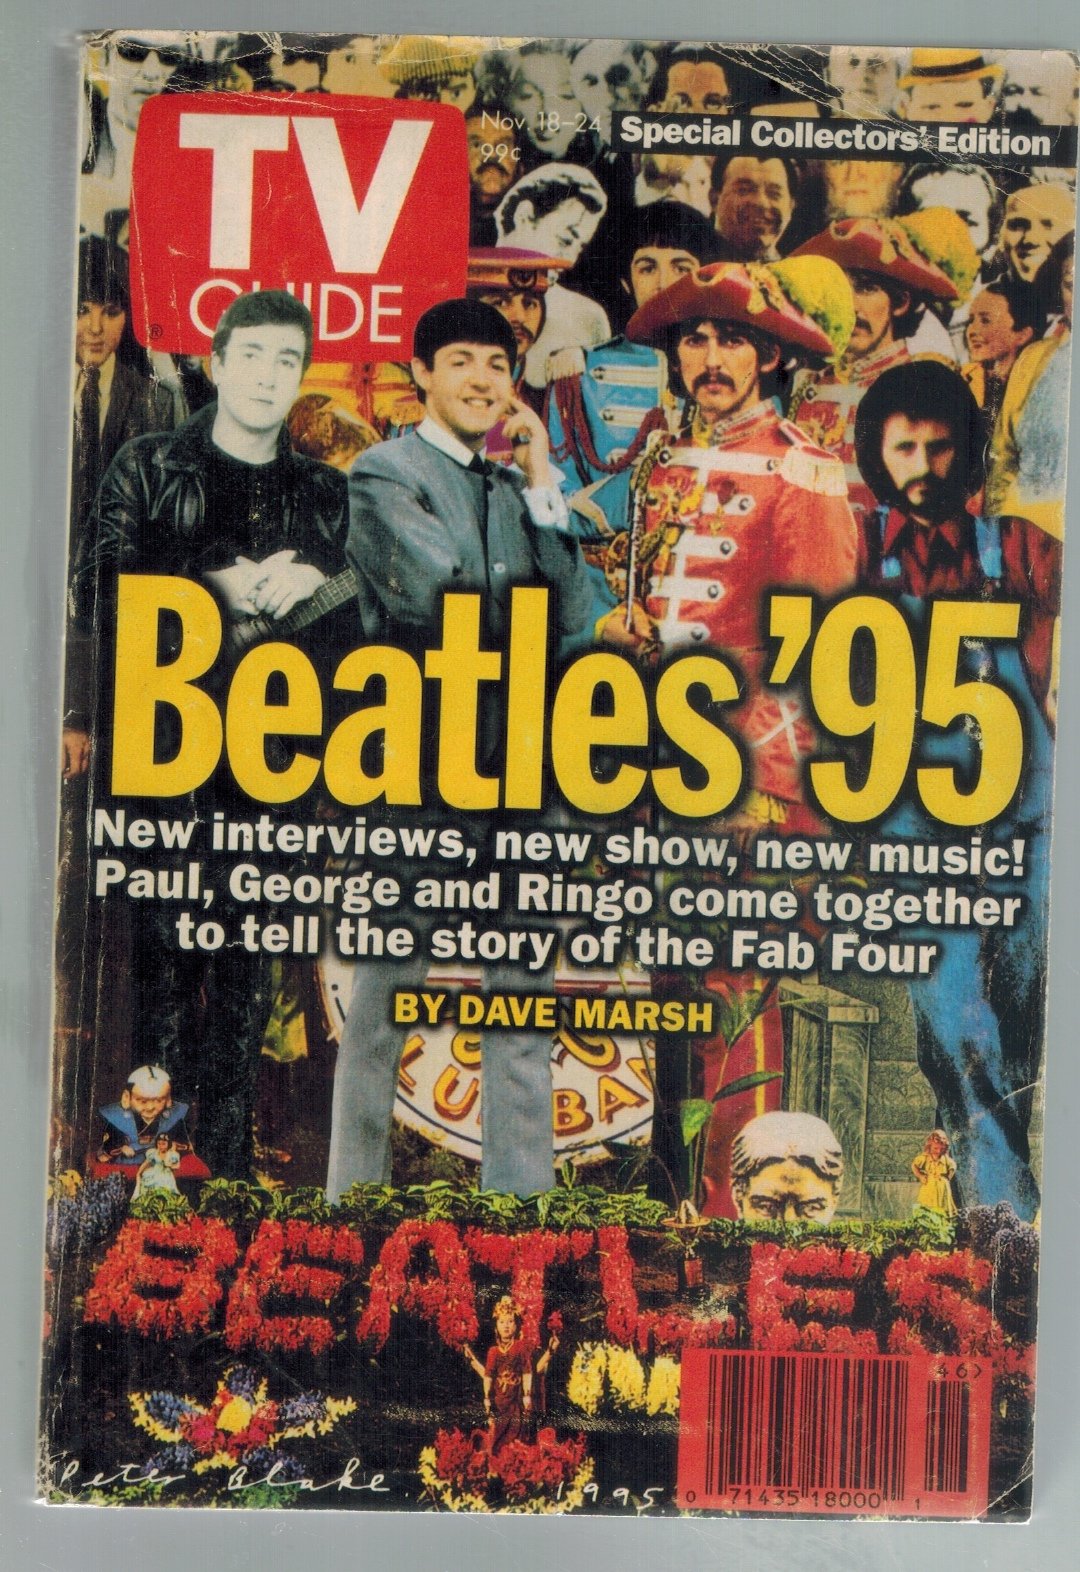 TV Guide Beatles 95  by Marsh, Dave and Tv Guide